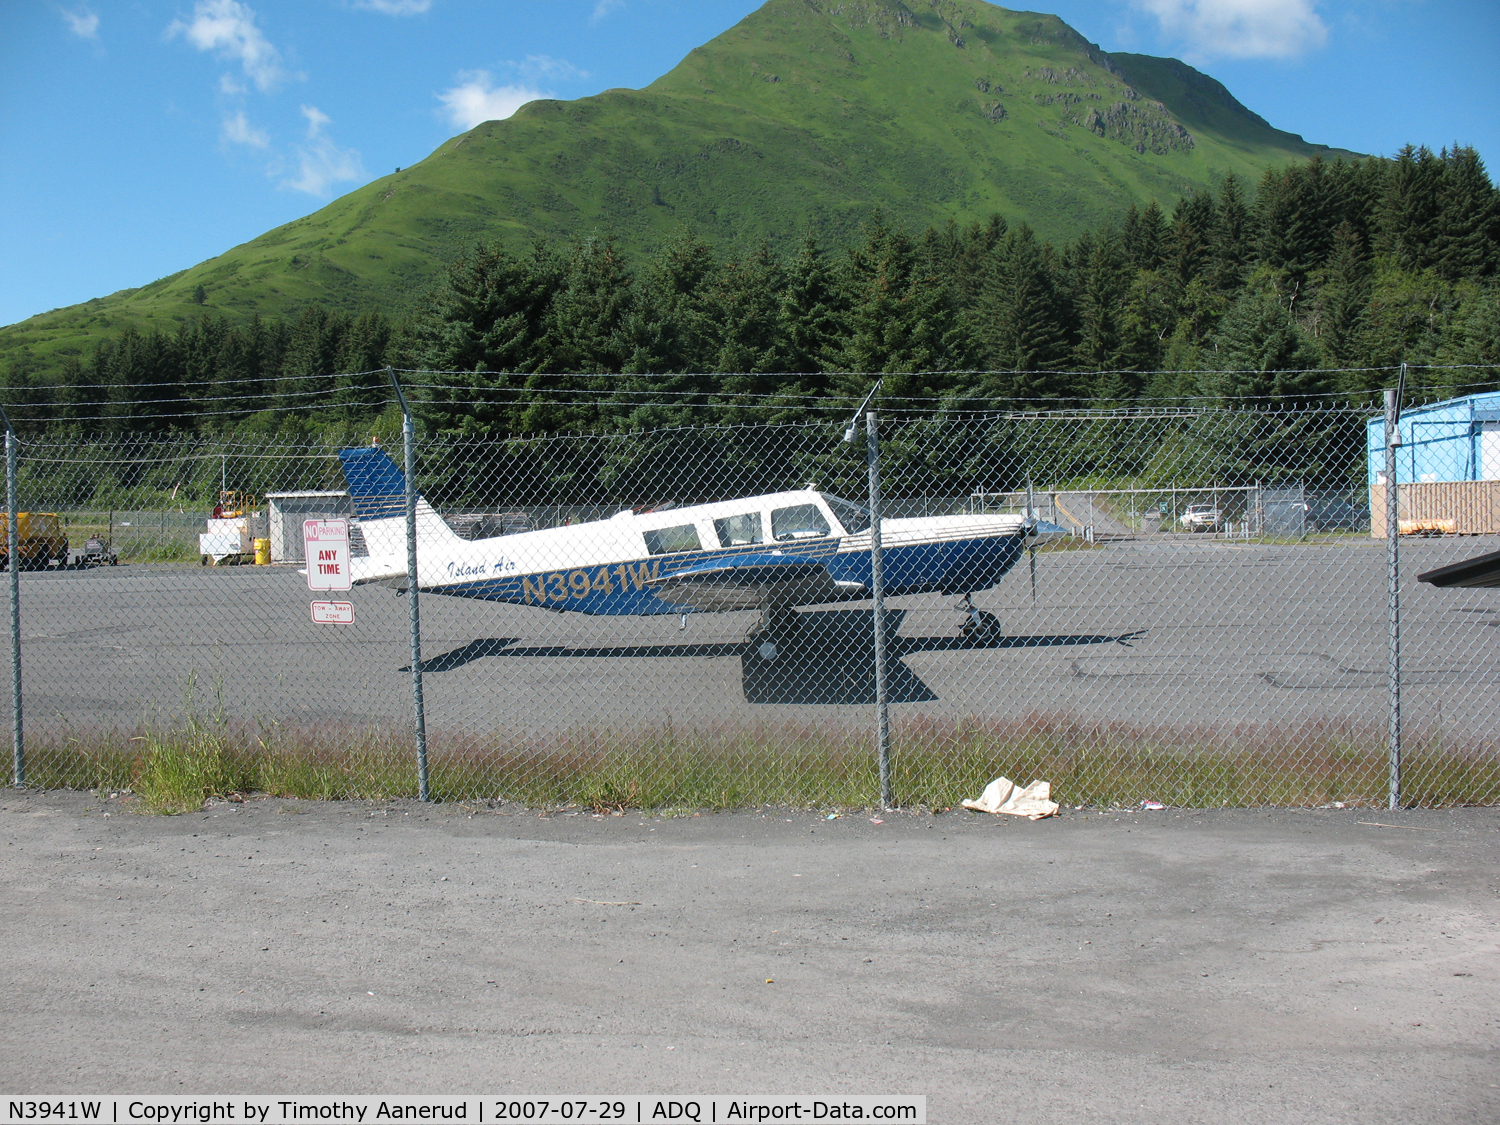 N3941W, 1967 Piper PA-32-260 Cherokee Six C/N 32-890, On the ramp at Kodiak.  I normally don't like through the fence photos, but it was too close to stick the camera through.